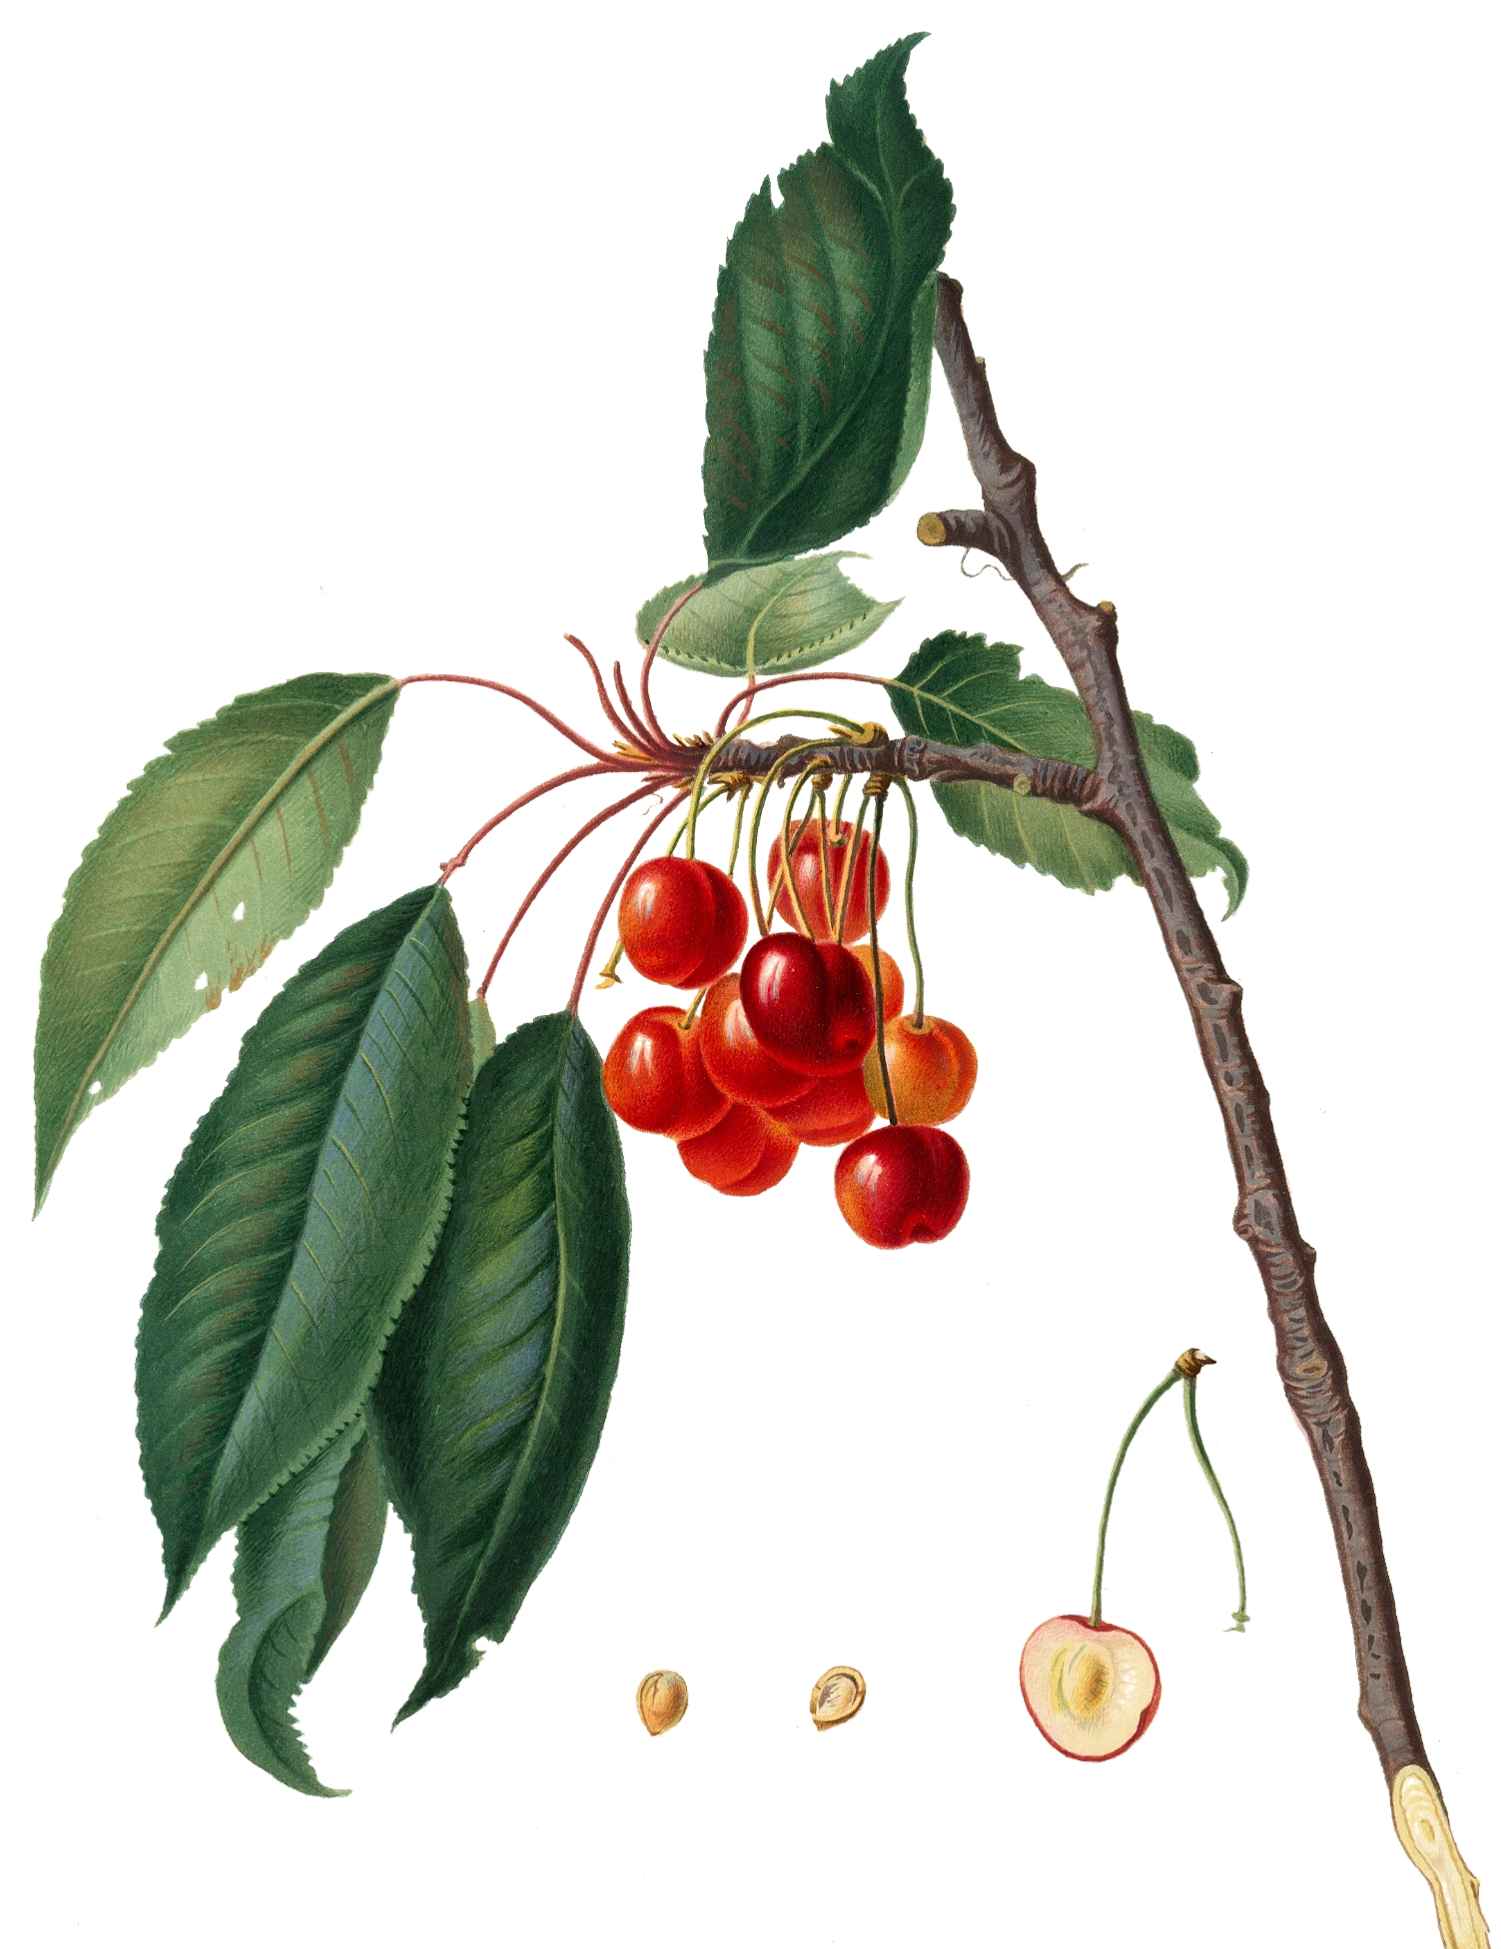 Background image with a cherry.